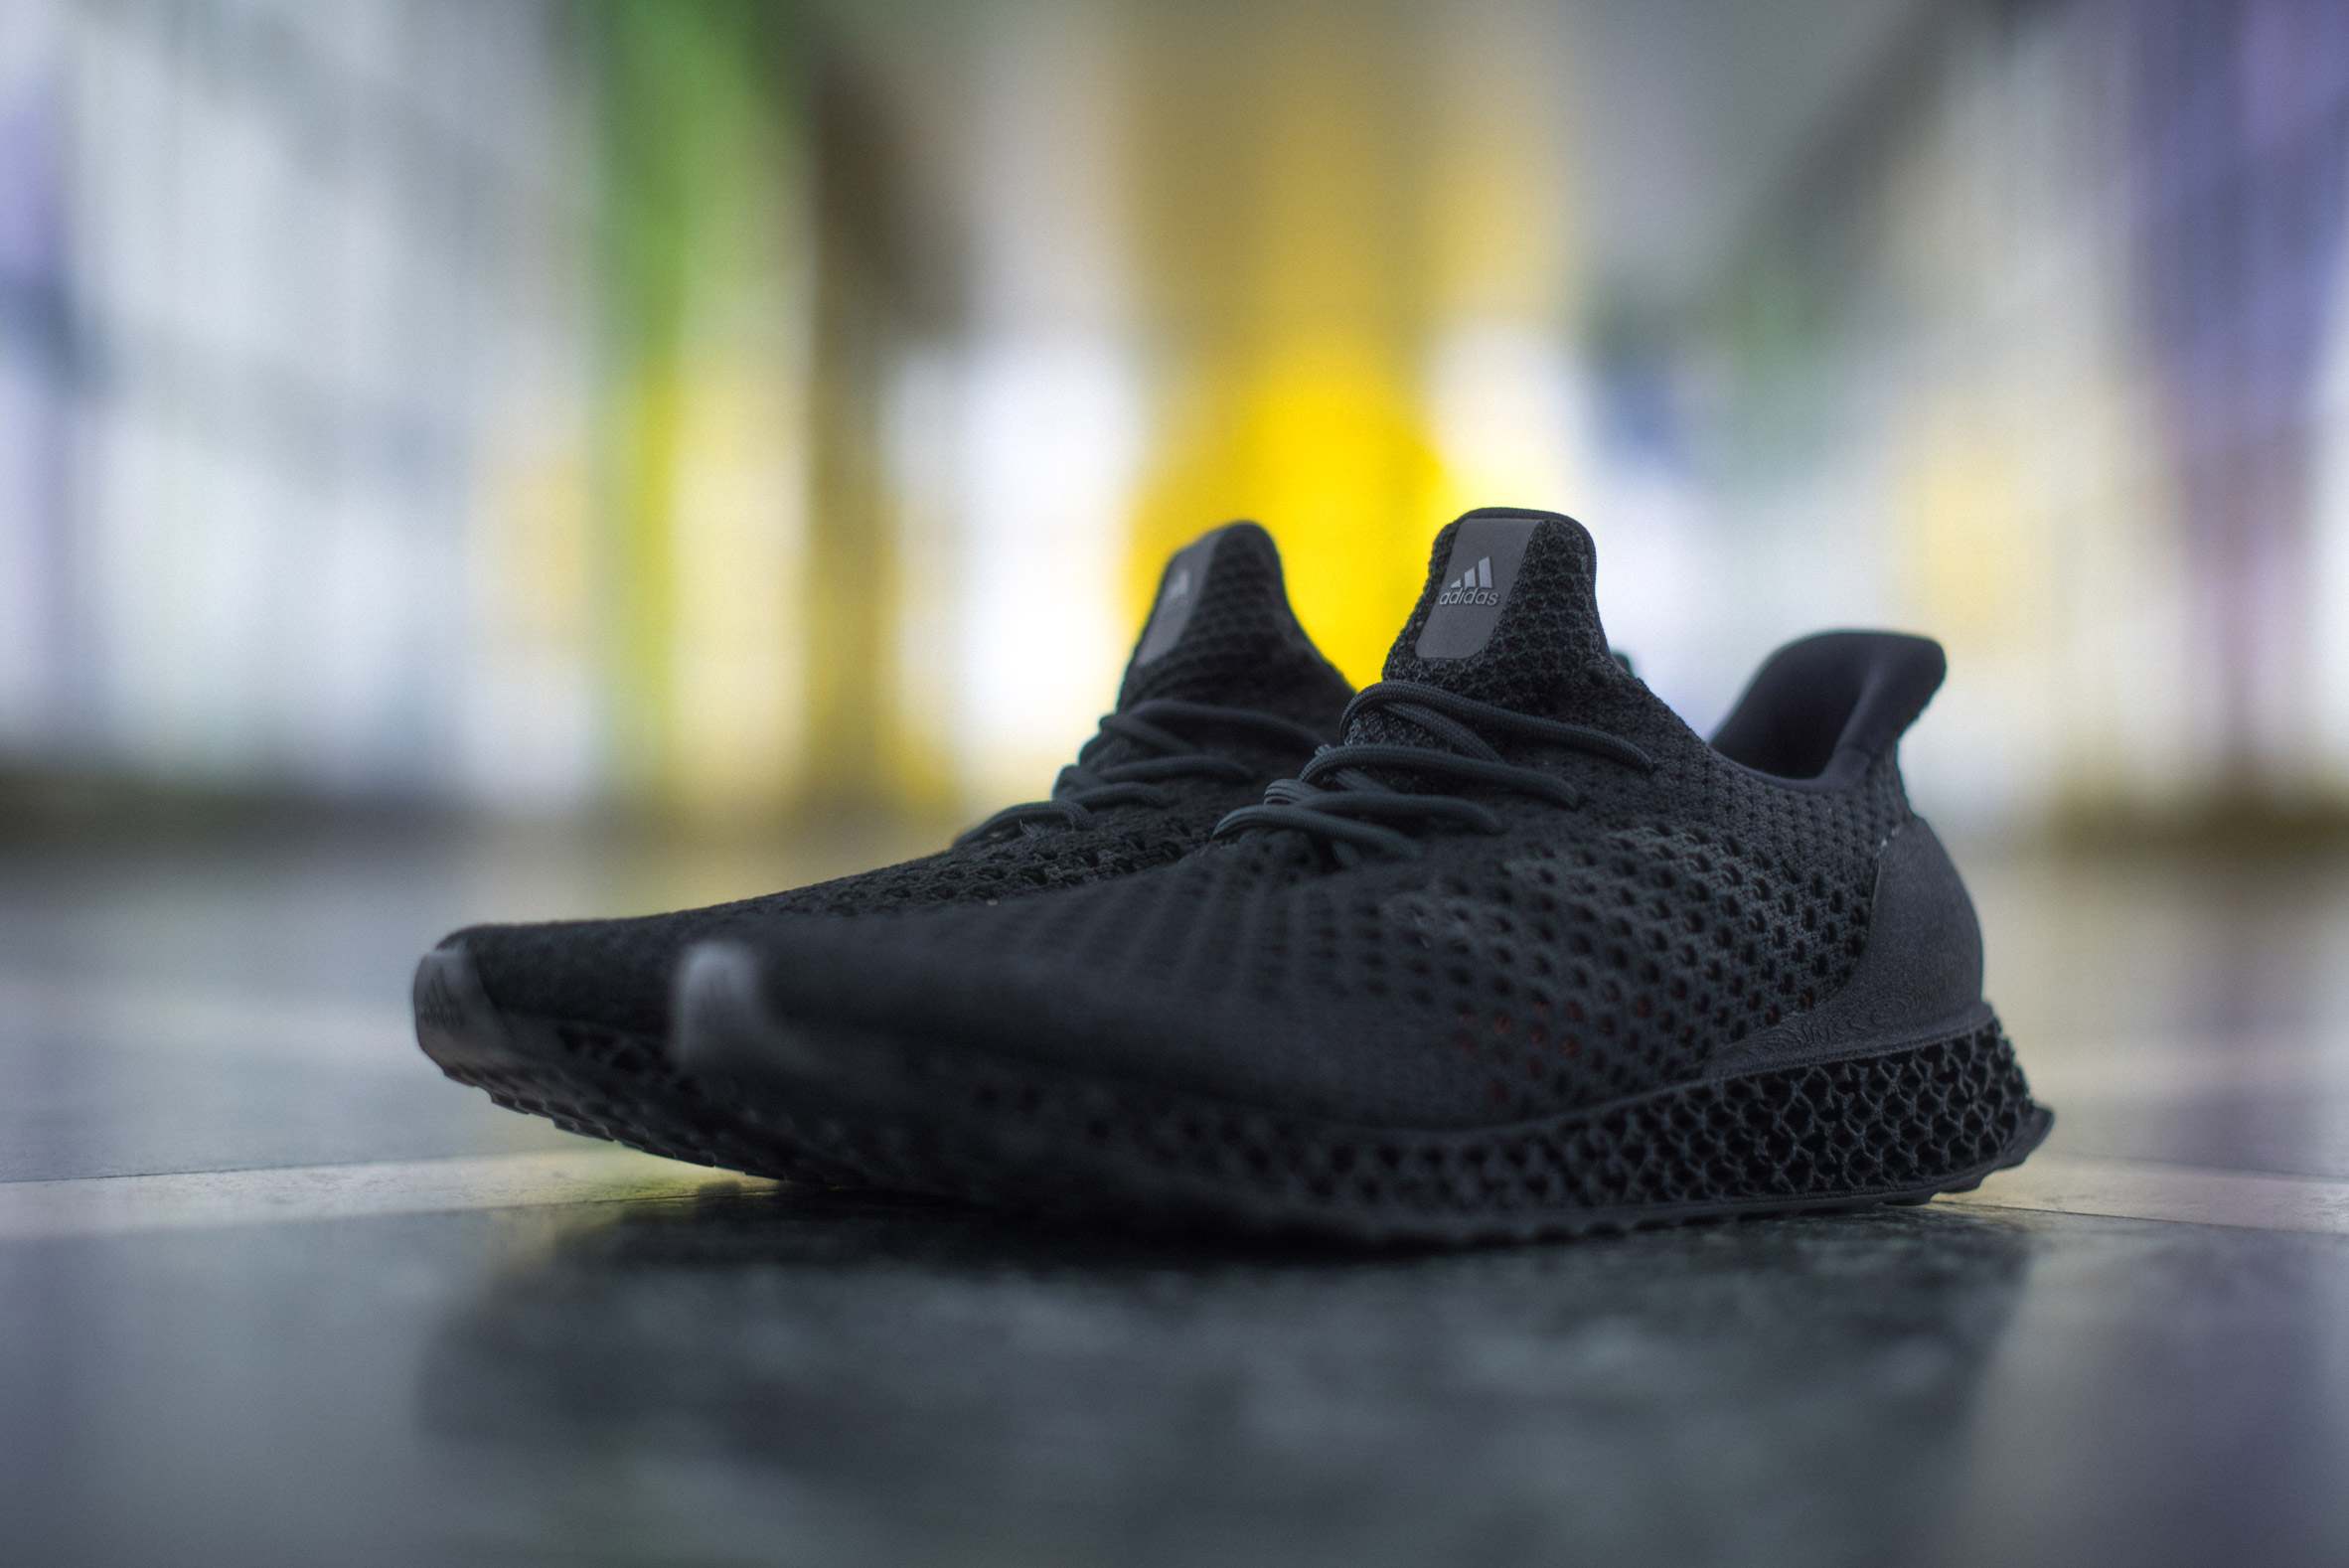 Chemie dorp Gepland 3D-printed Adidas trainers go on sale